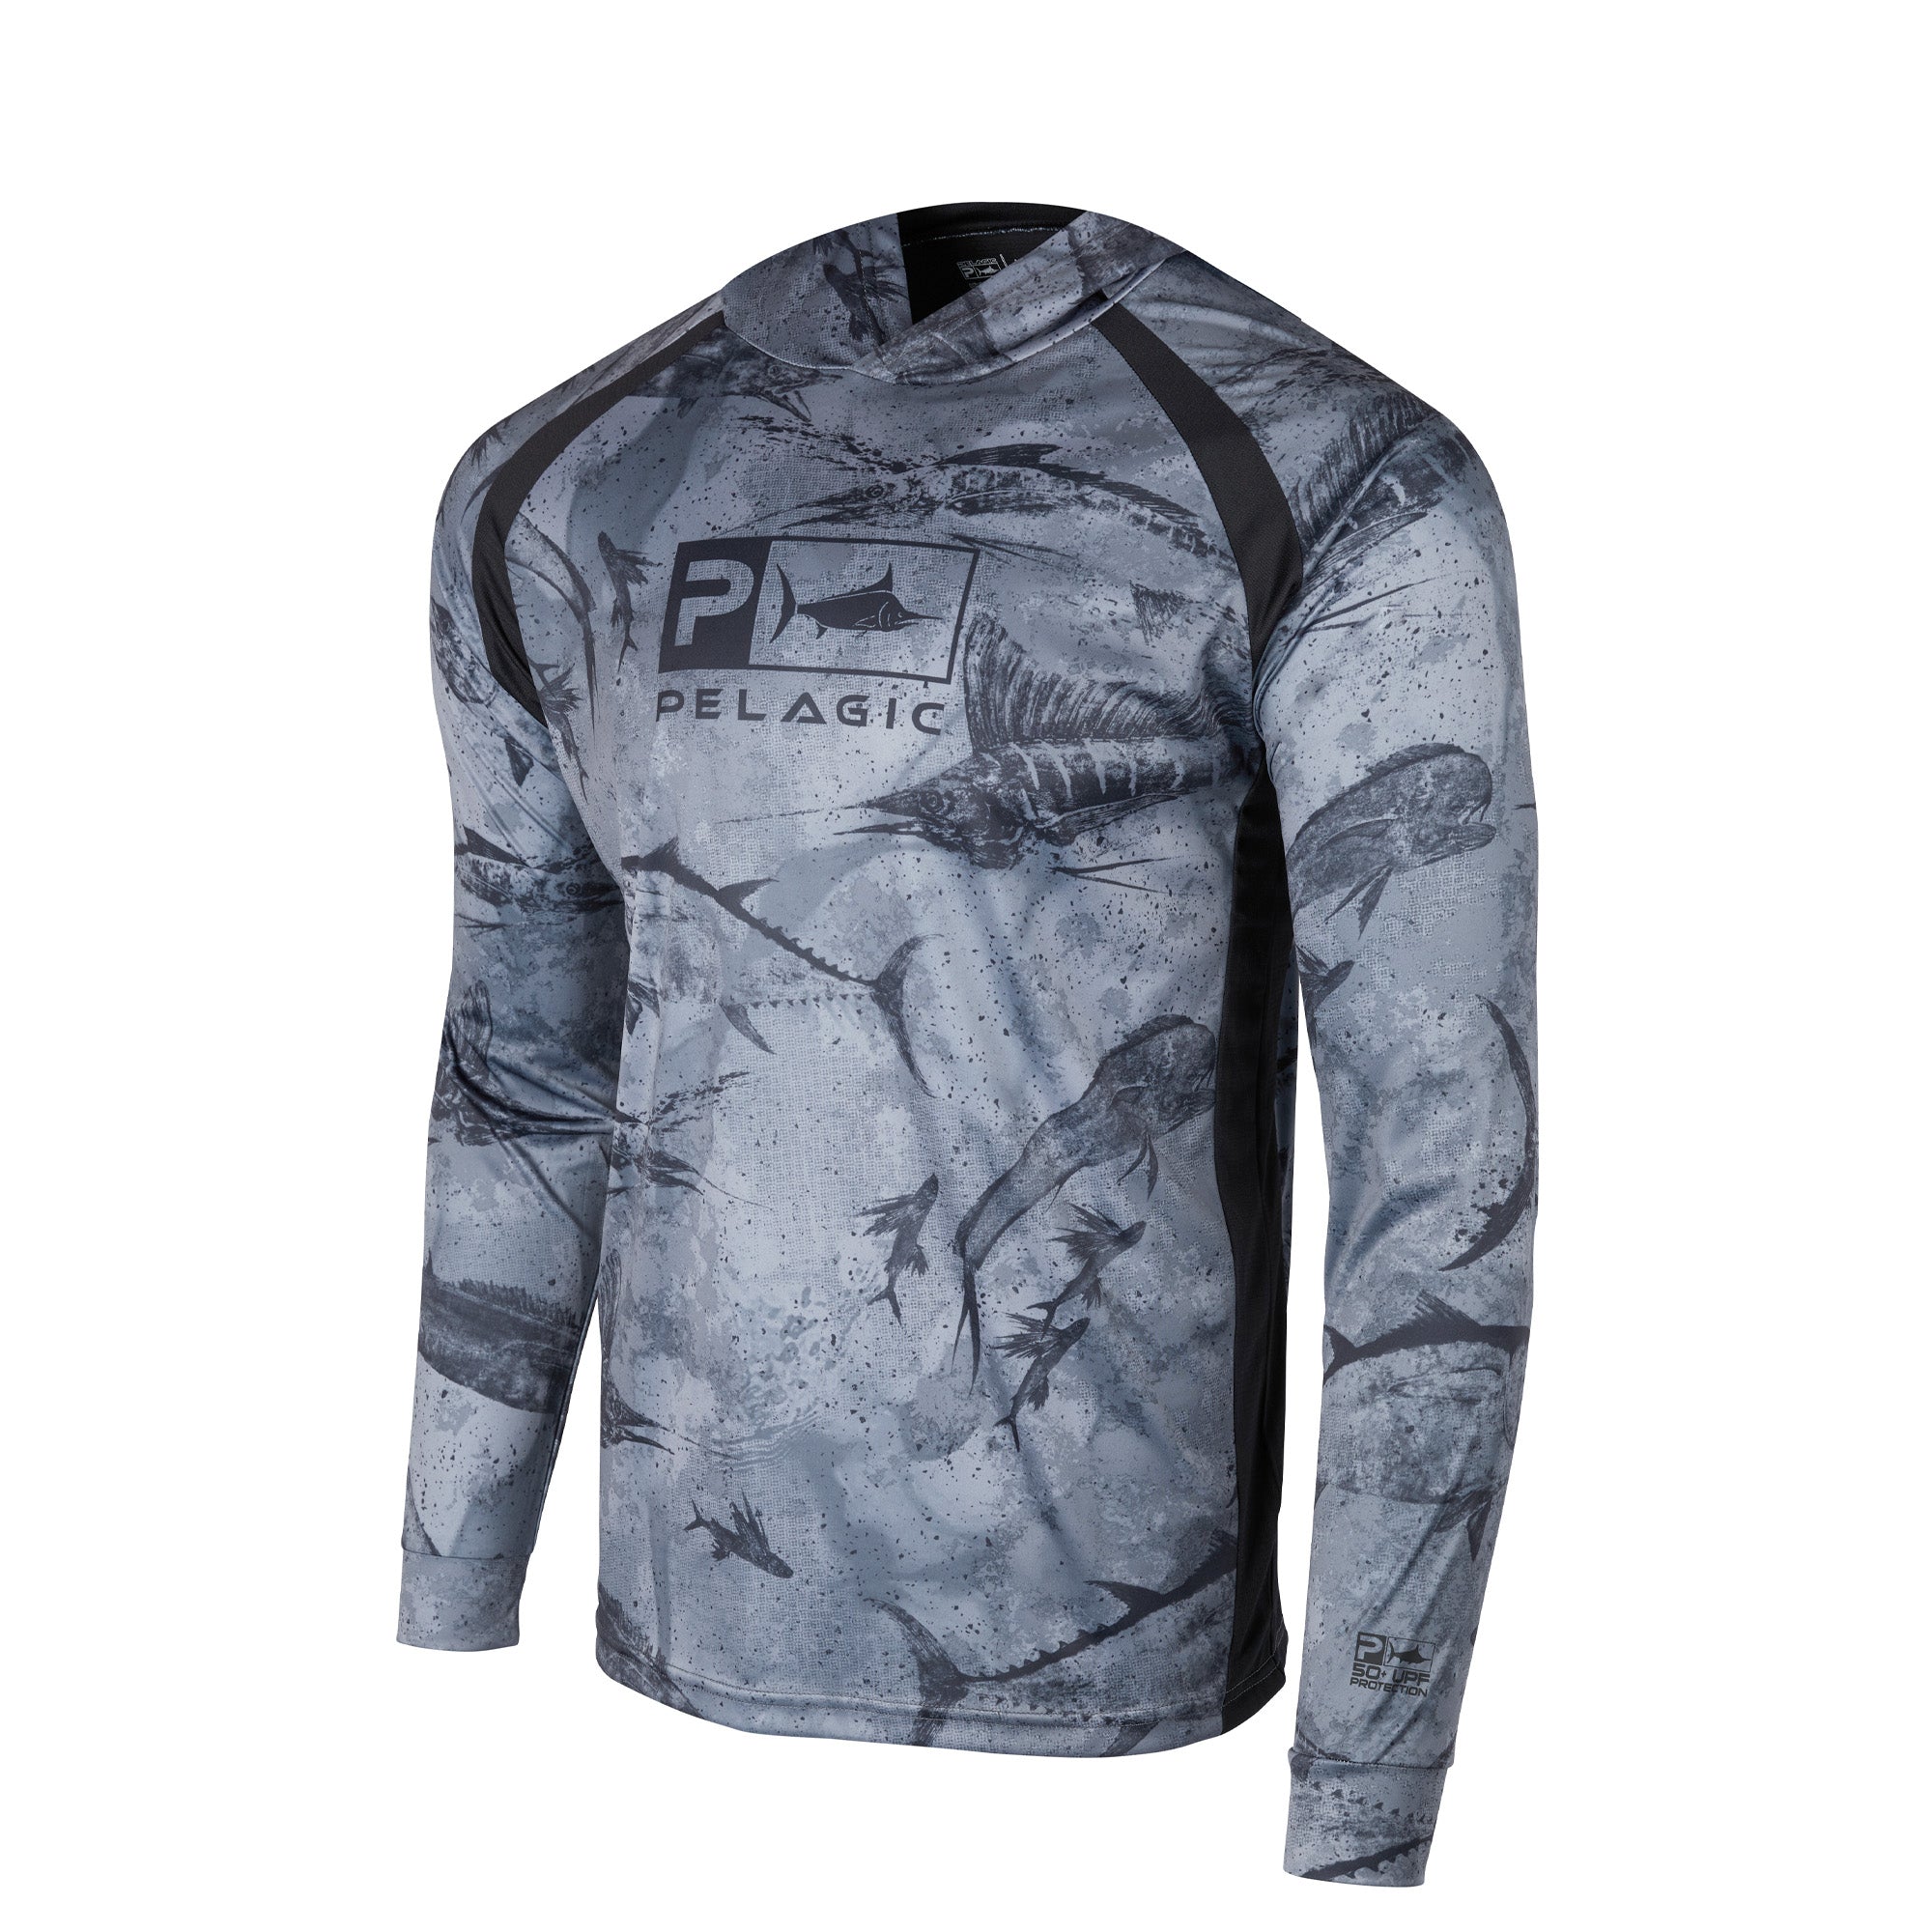 Fishing Shirts for Men Long Sleeve, Mens Fishing Shirts Long Sleeve Hooded,  SPF Shirts for Men, Fishing Gear and Equipment